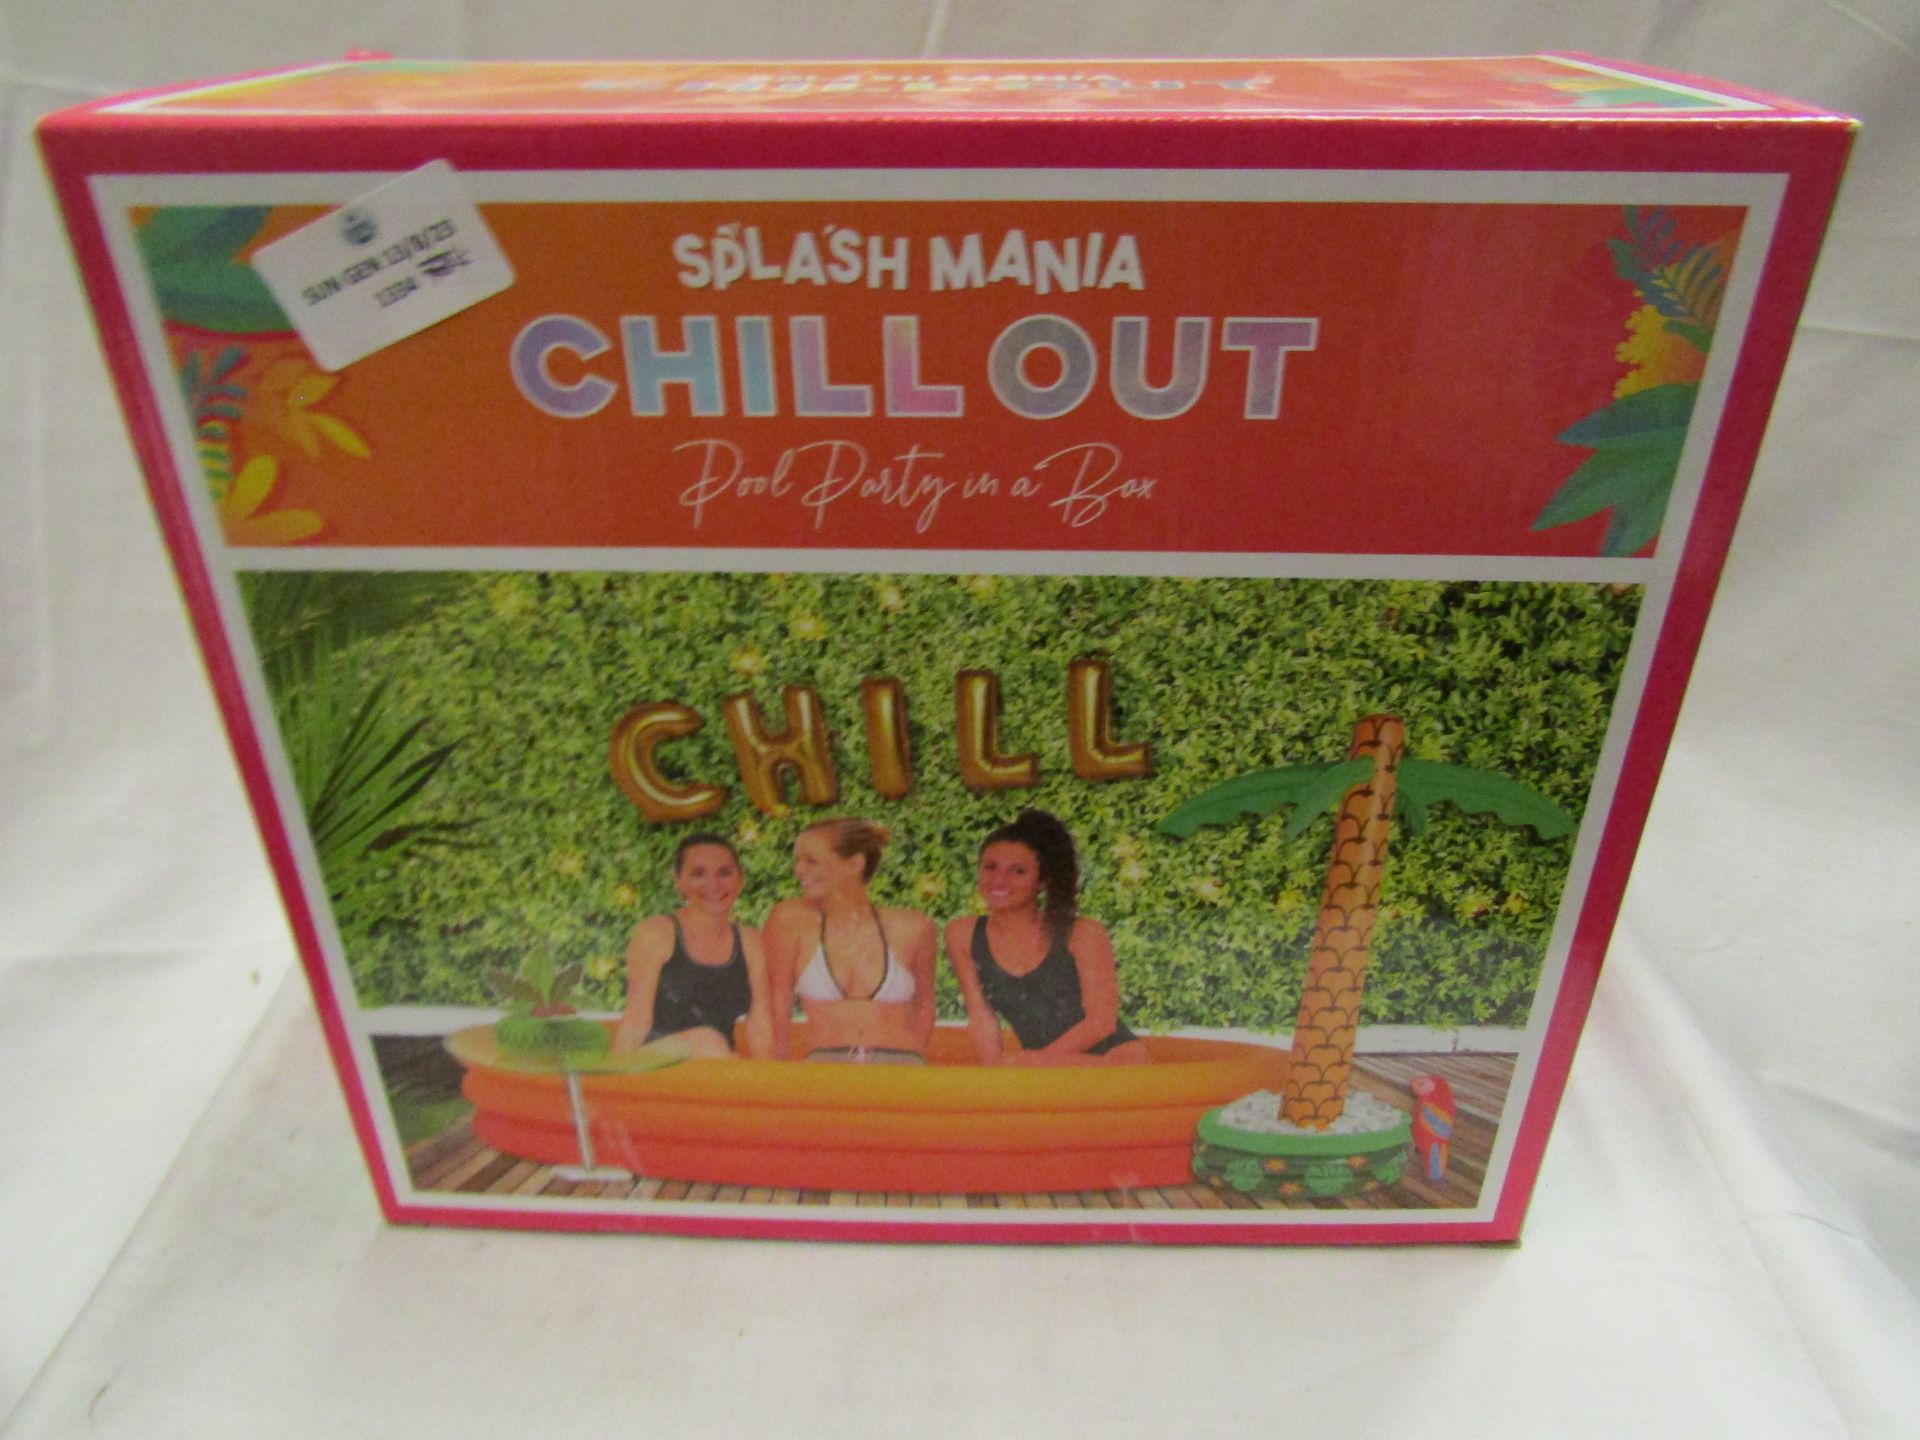 1 X Chill Out Party in a Box ( See Image for Dimensions )Unchecked